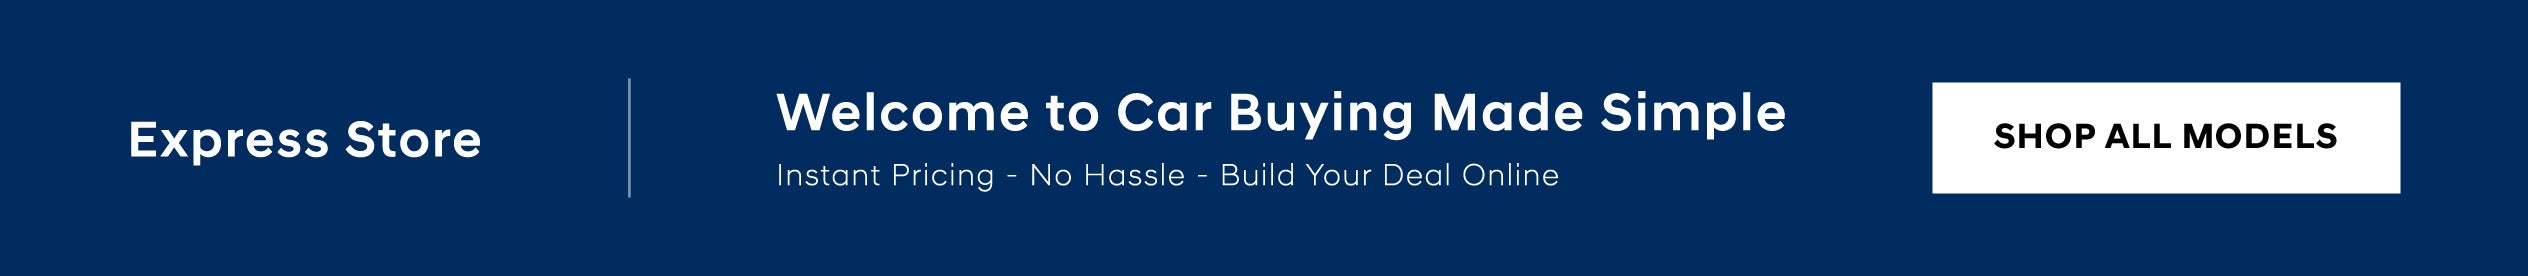 Car Buying Made Simple